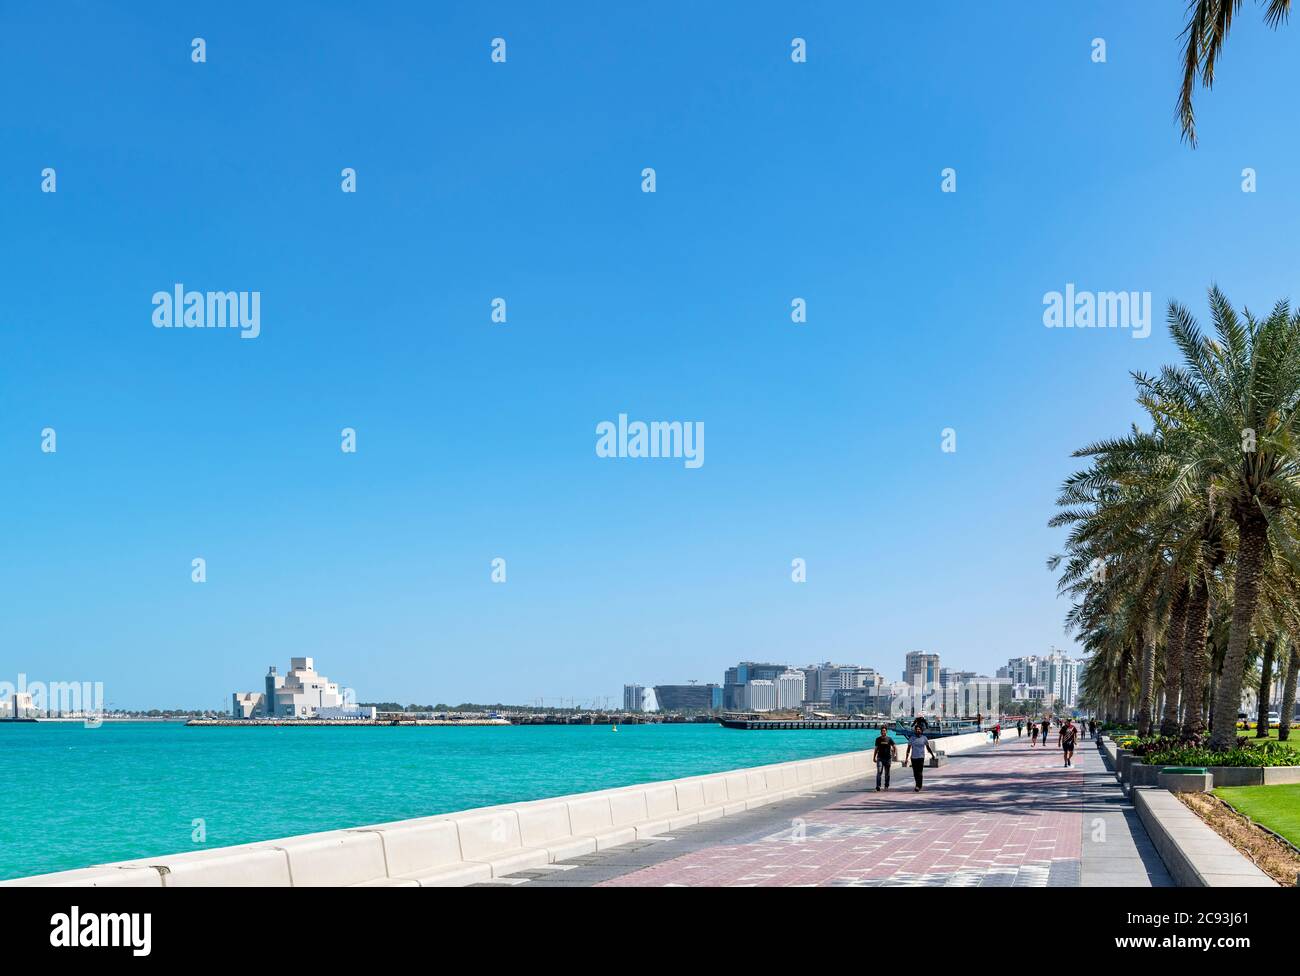 The Corniche looking towards the Museum of Islamic Art, Doha, Qatar, Middle East Stock Photo